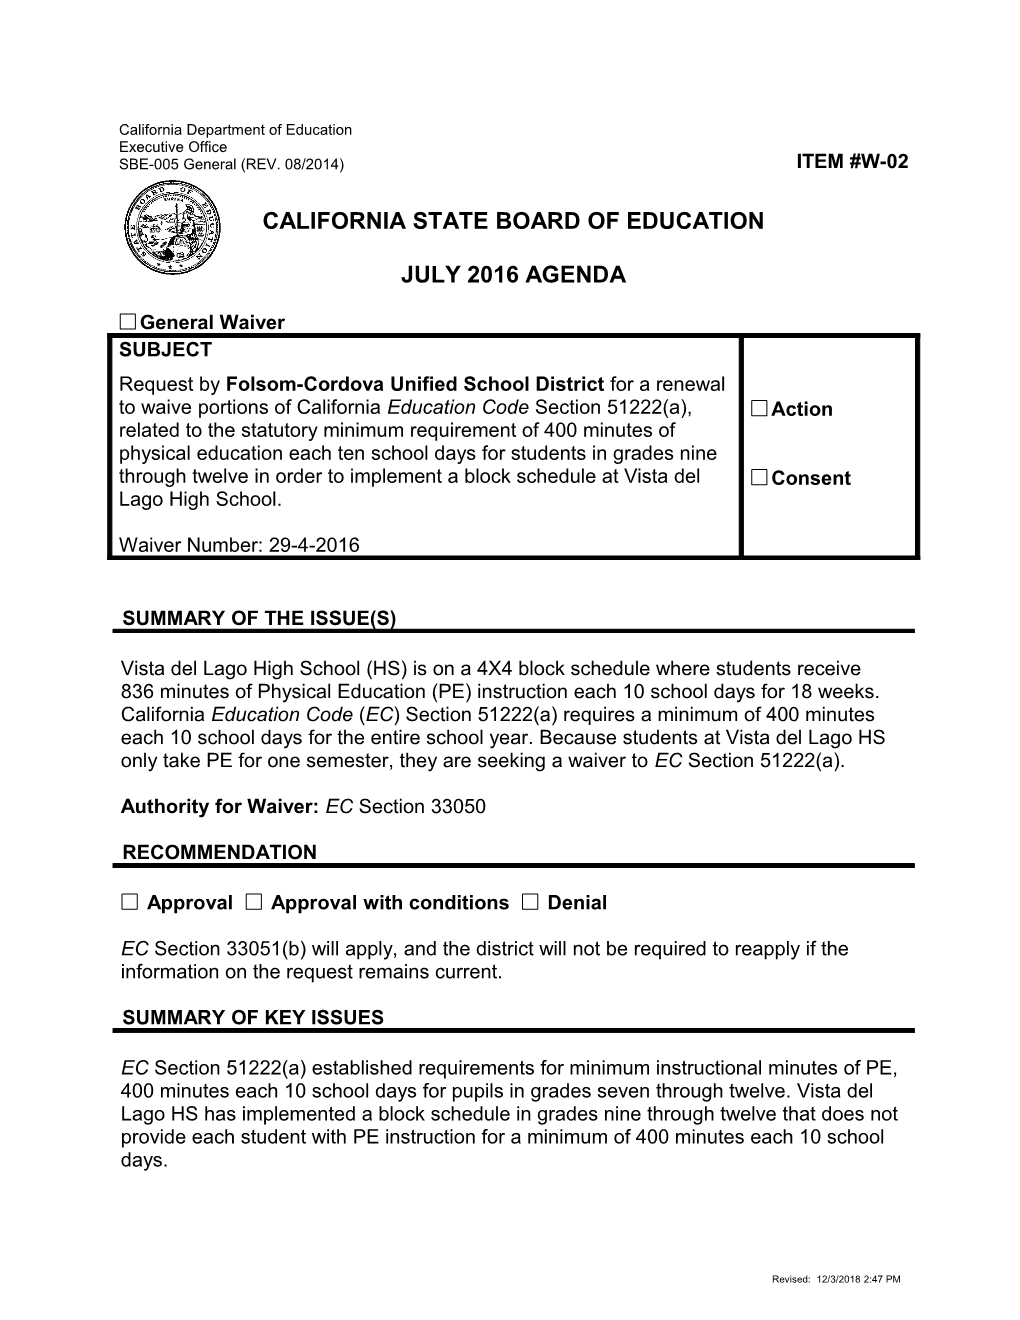 July 2016 Waiver Item W-02 - Meeting Agendas (CA State Board of Education)